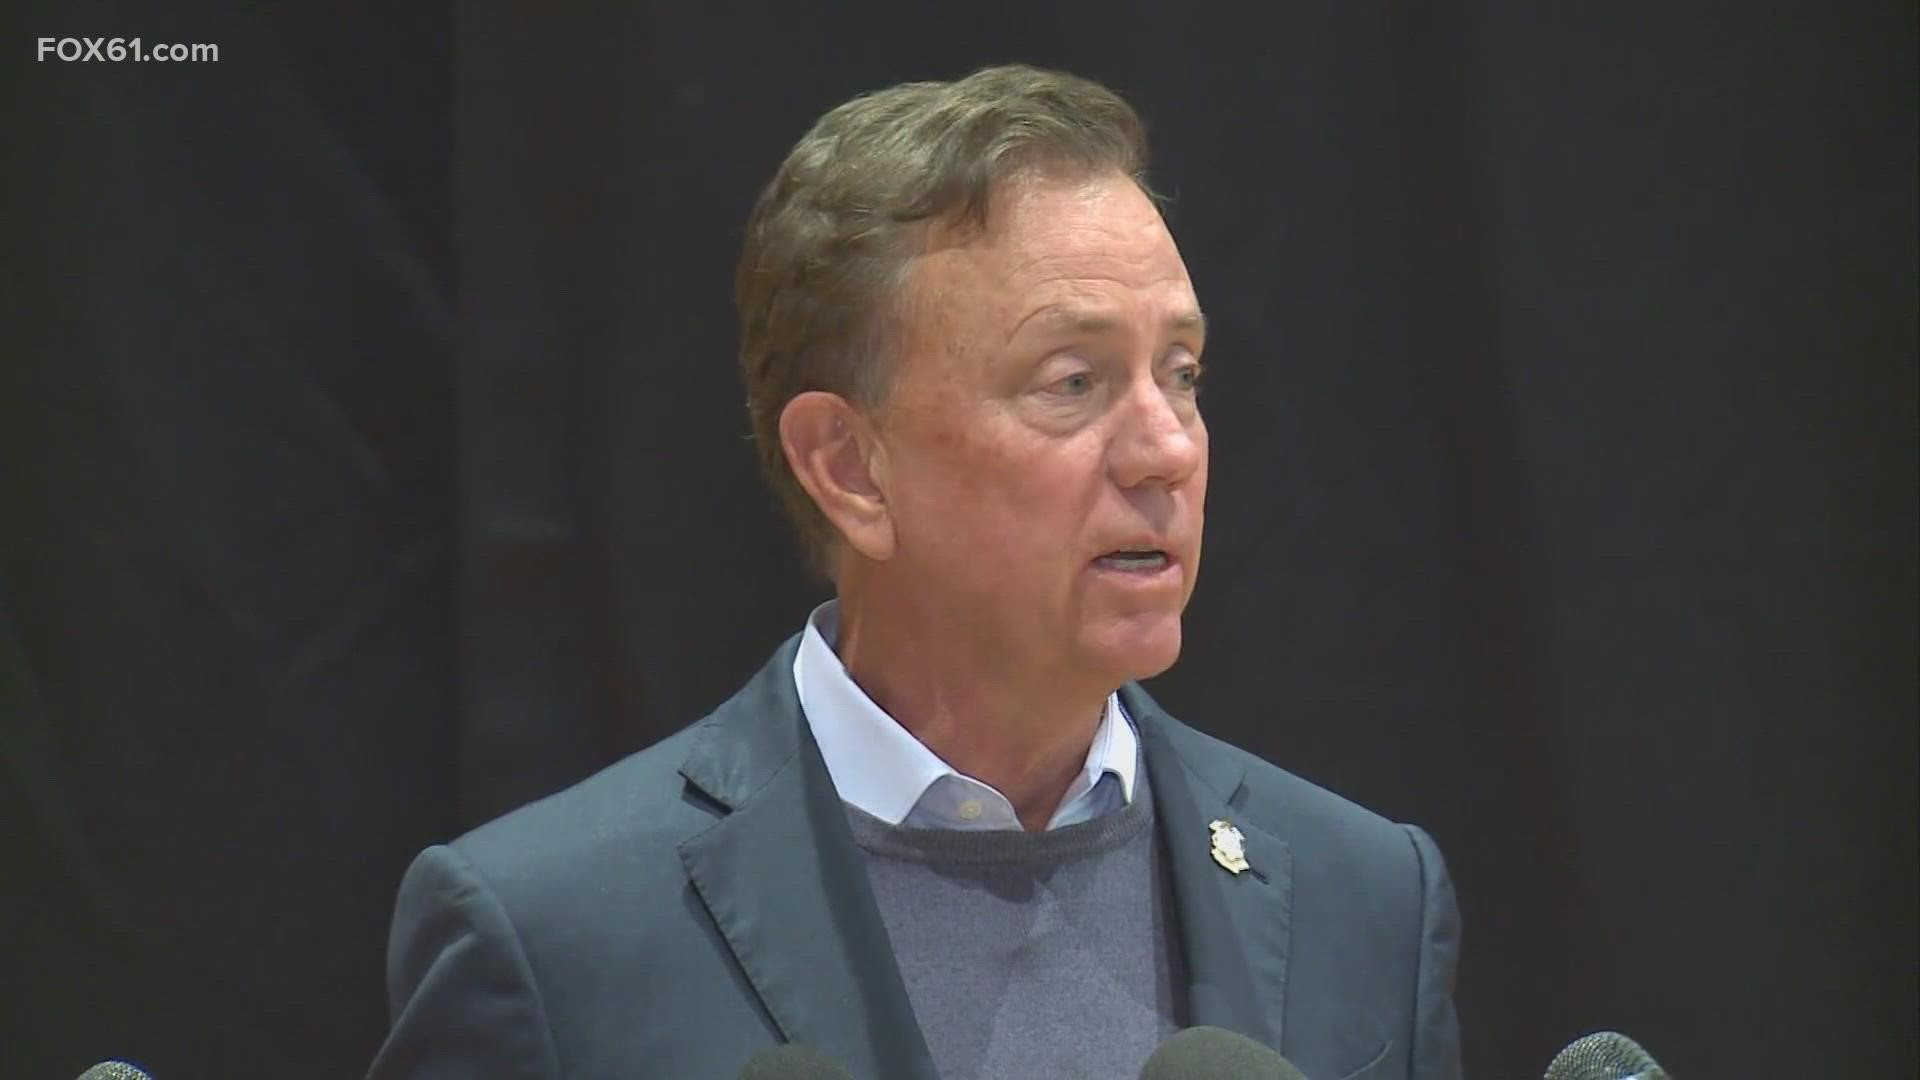 Gov. Ned. Lamont said Connecticut must remain vigilant, which includes being vaccinated.